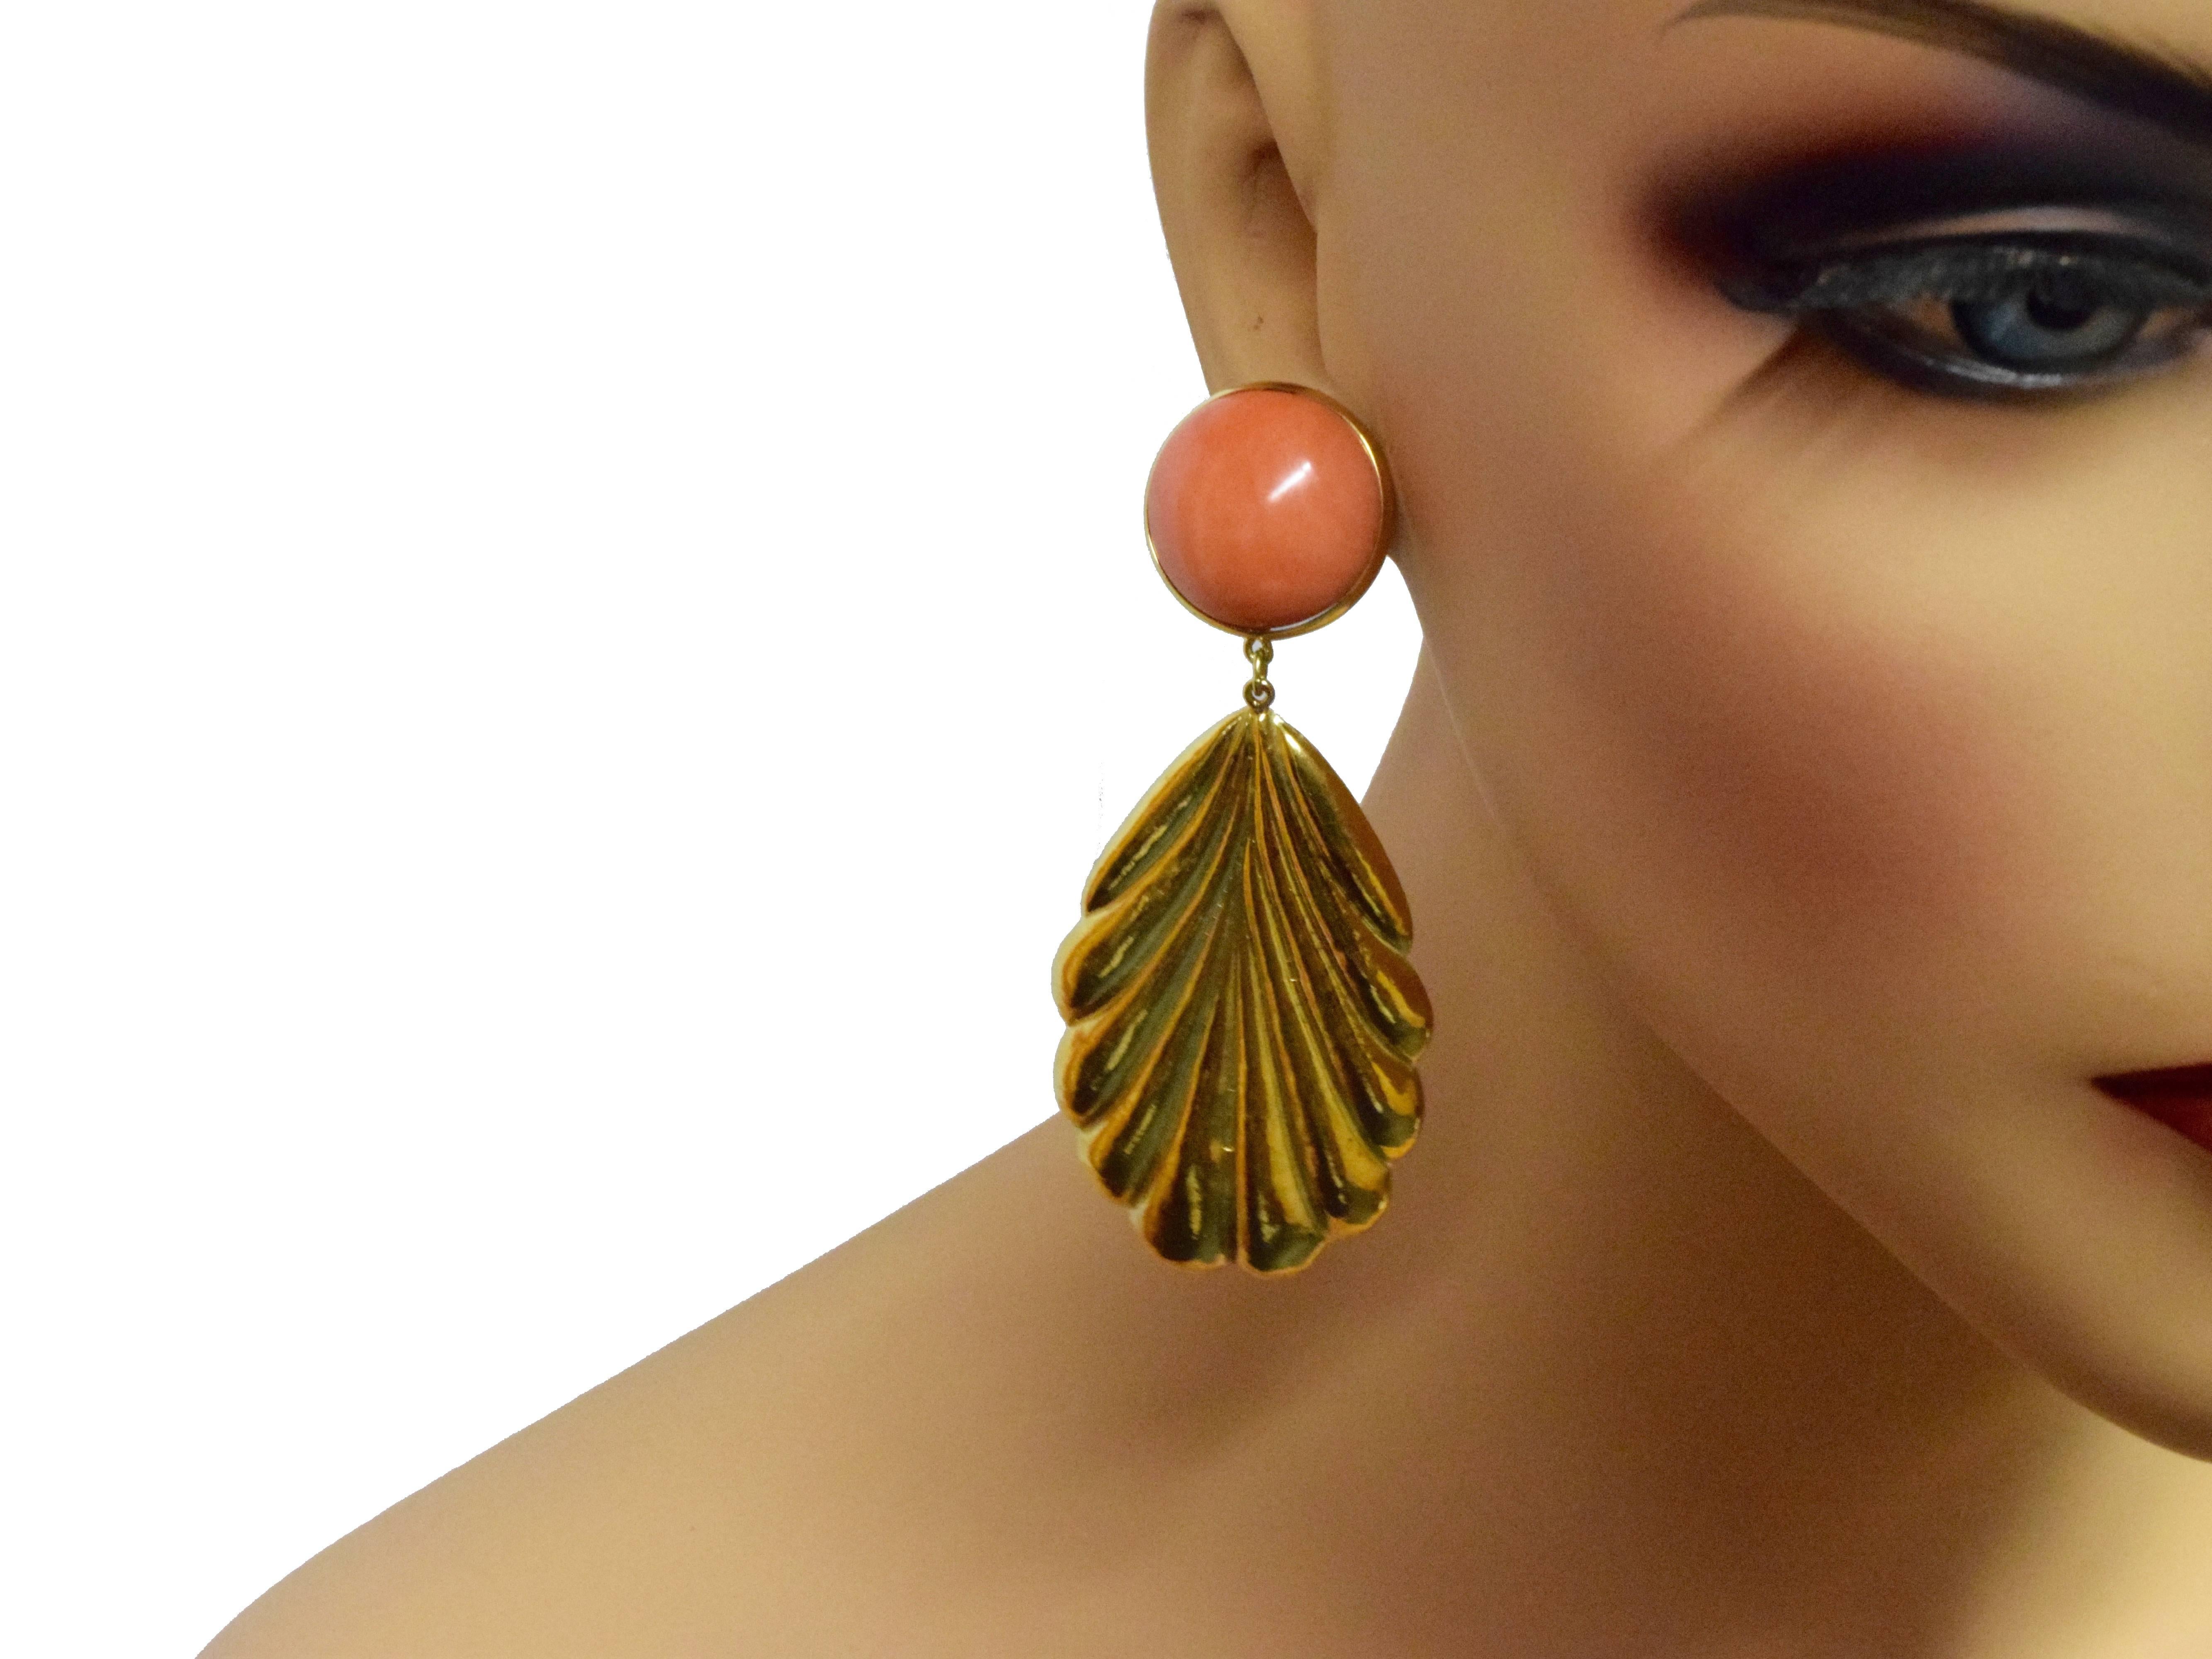 Very Dramatic Large Gold Leaf Earrings

Metal: 18k Yellow Gold
Total Item Weight (grams): 36.8 
Leaf Length: 2.30 inches
Leaf Width: 1.41 inches
Coral Diameter: 21.1 mm
Coral Thickness: 11.5 mm
Total Earring Length: 3.10 inches
